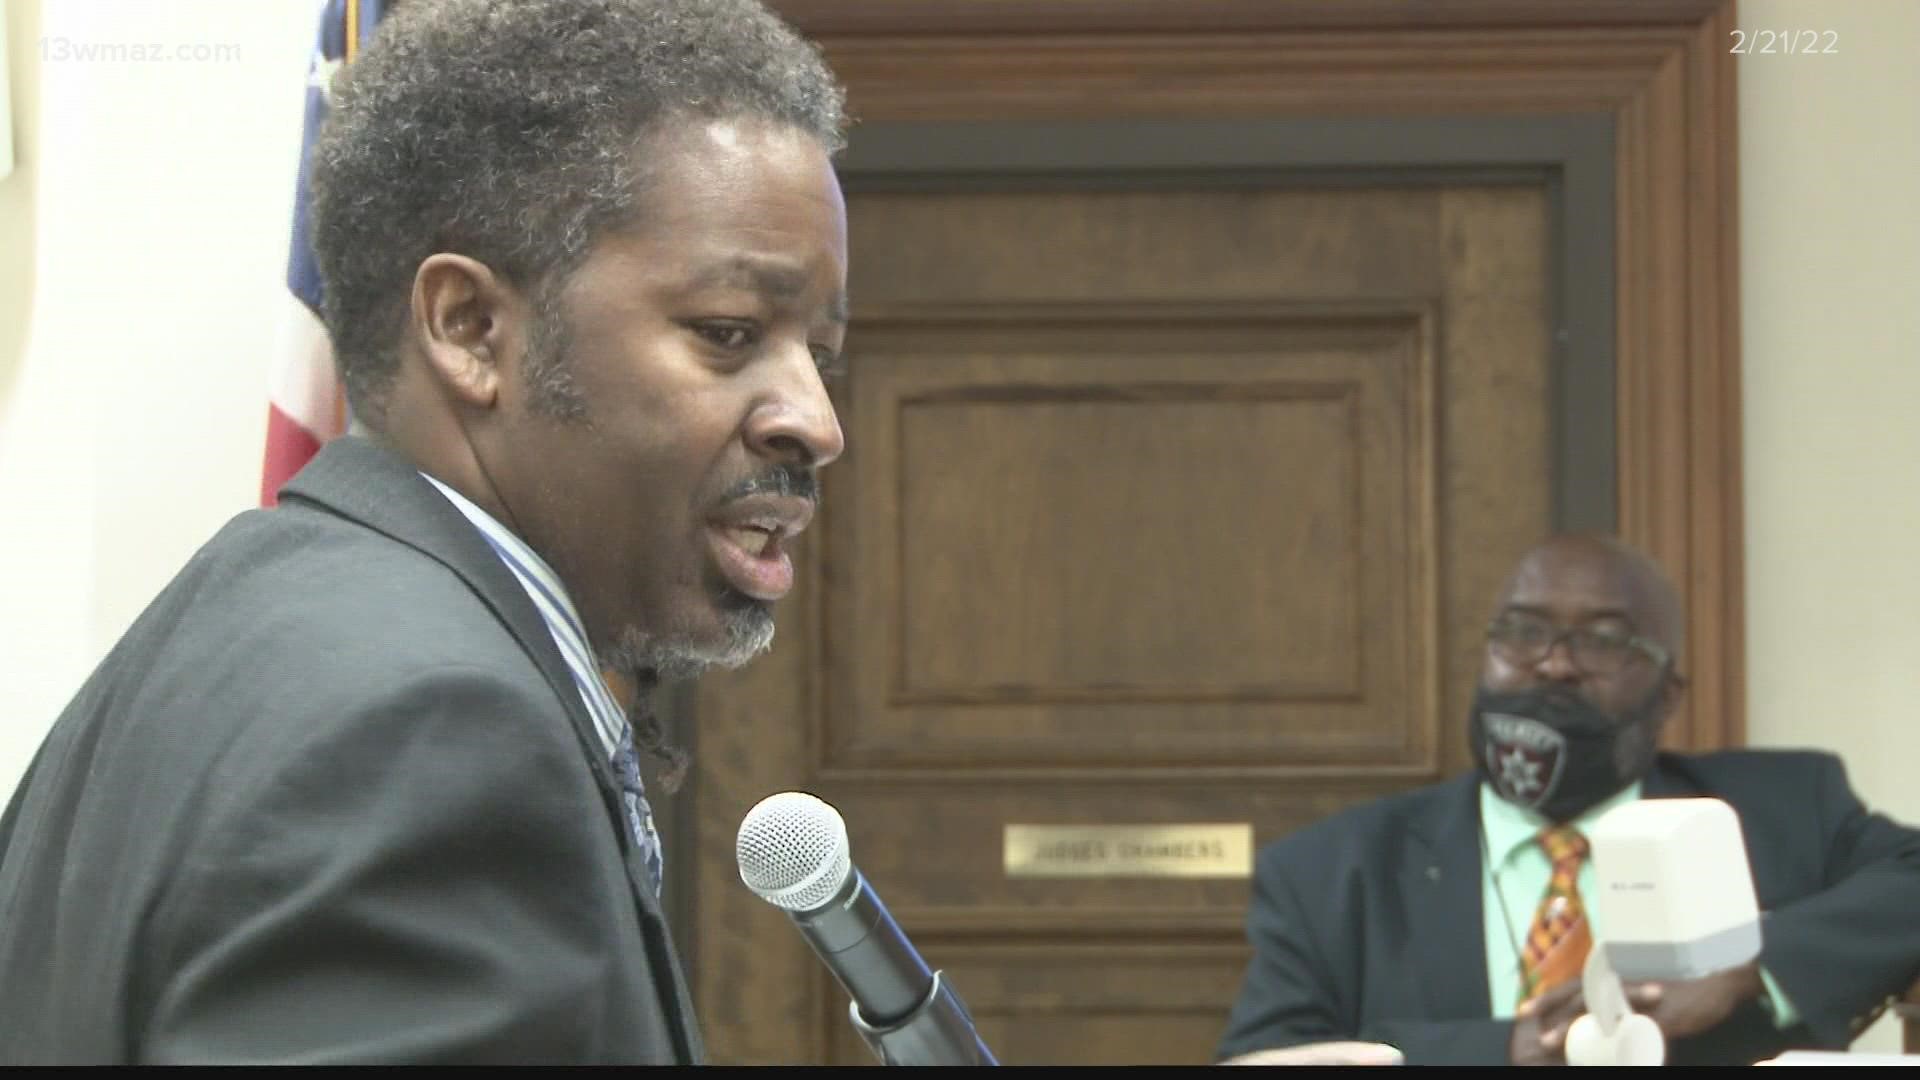 Macon Water Authority Board Member Desmond Brown went to jail this week and was held in contempt of court.